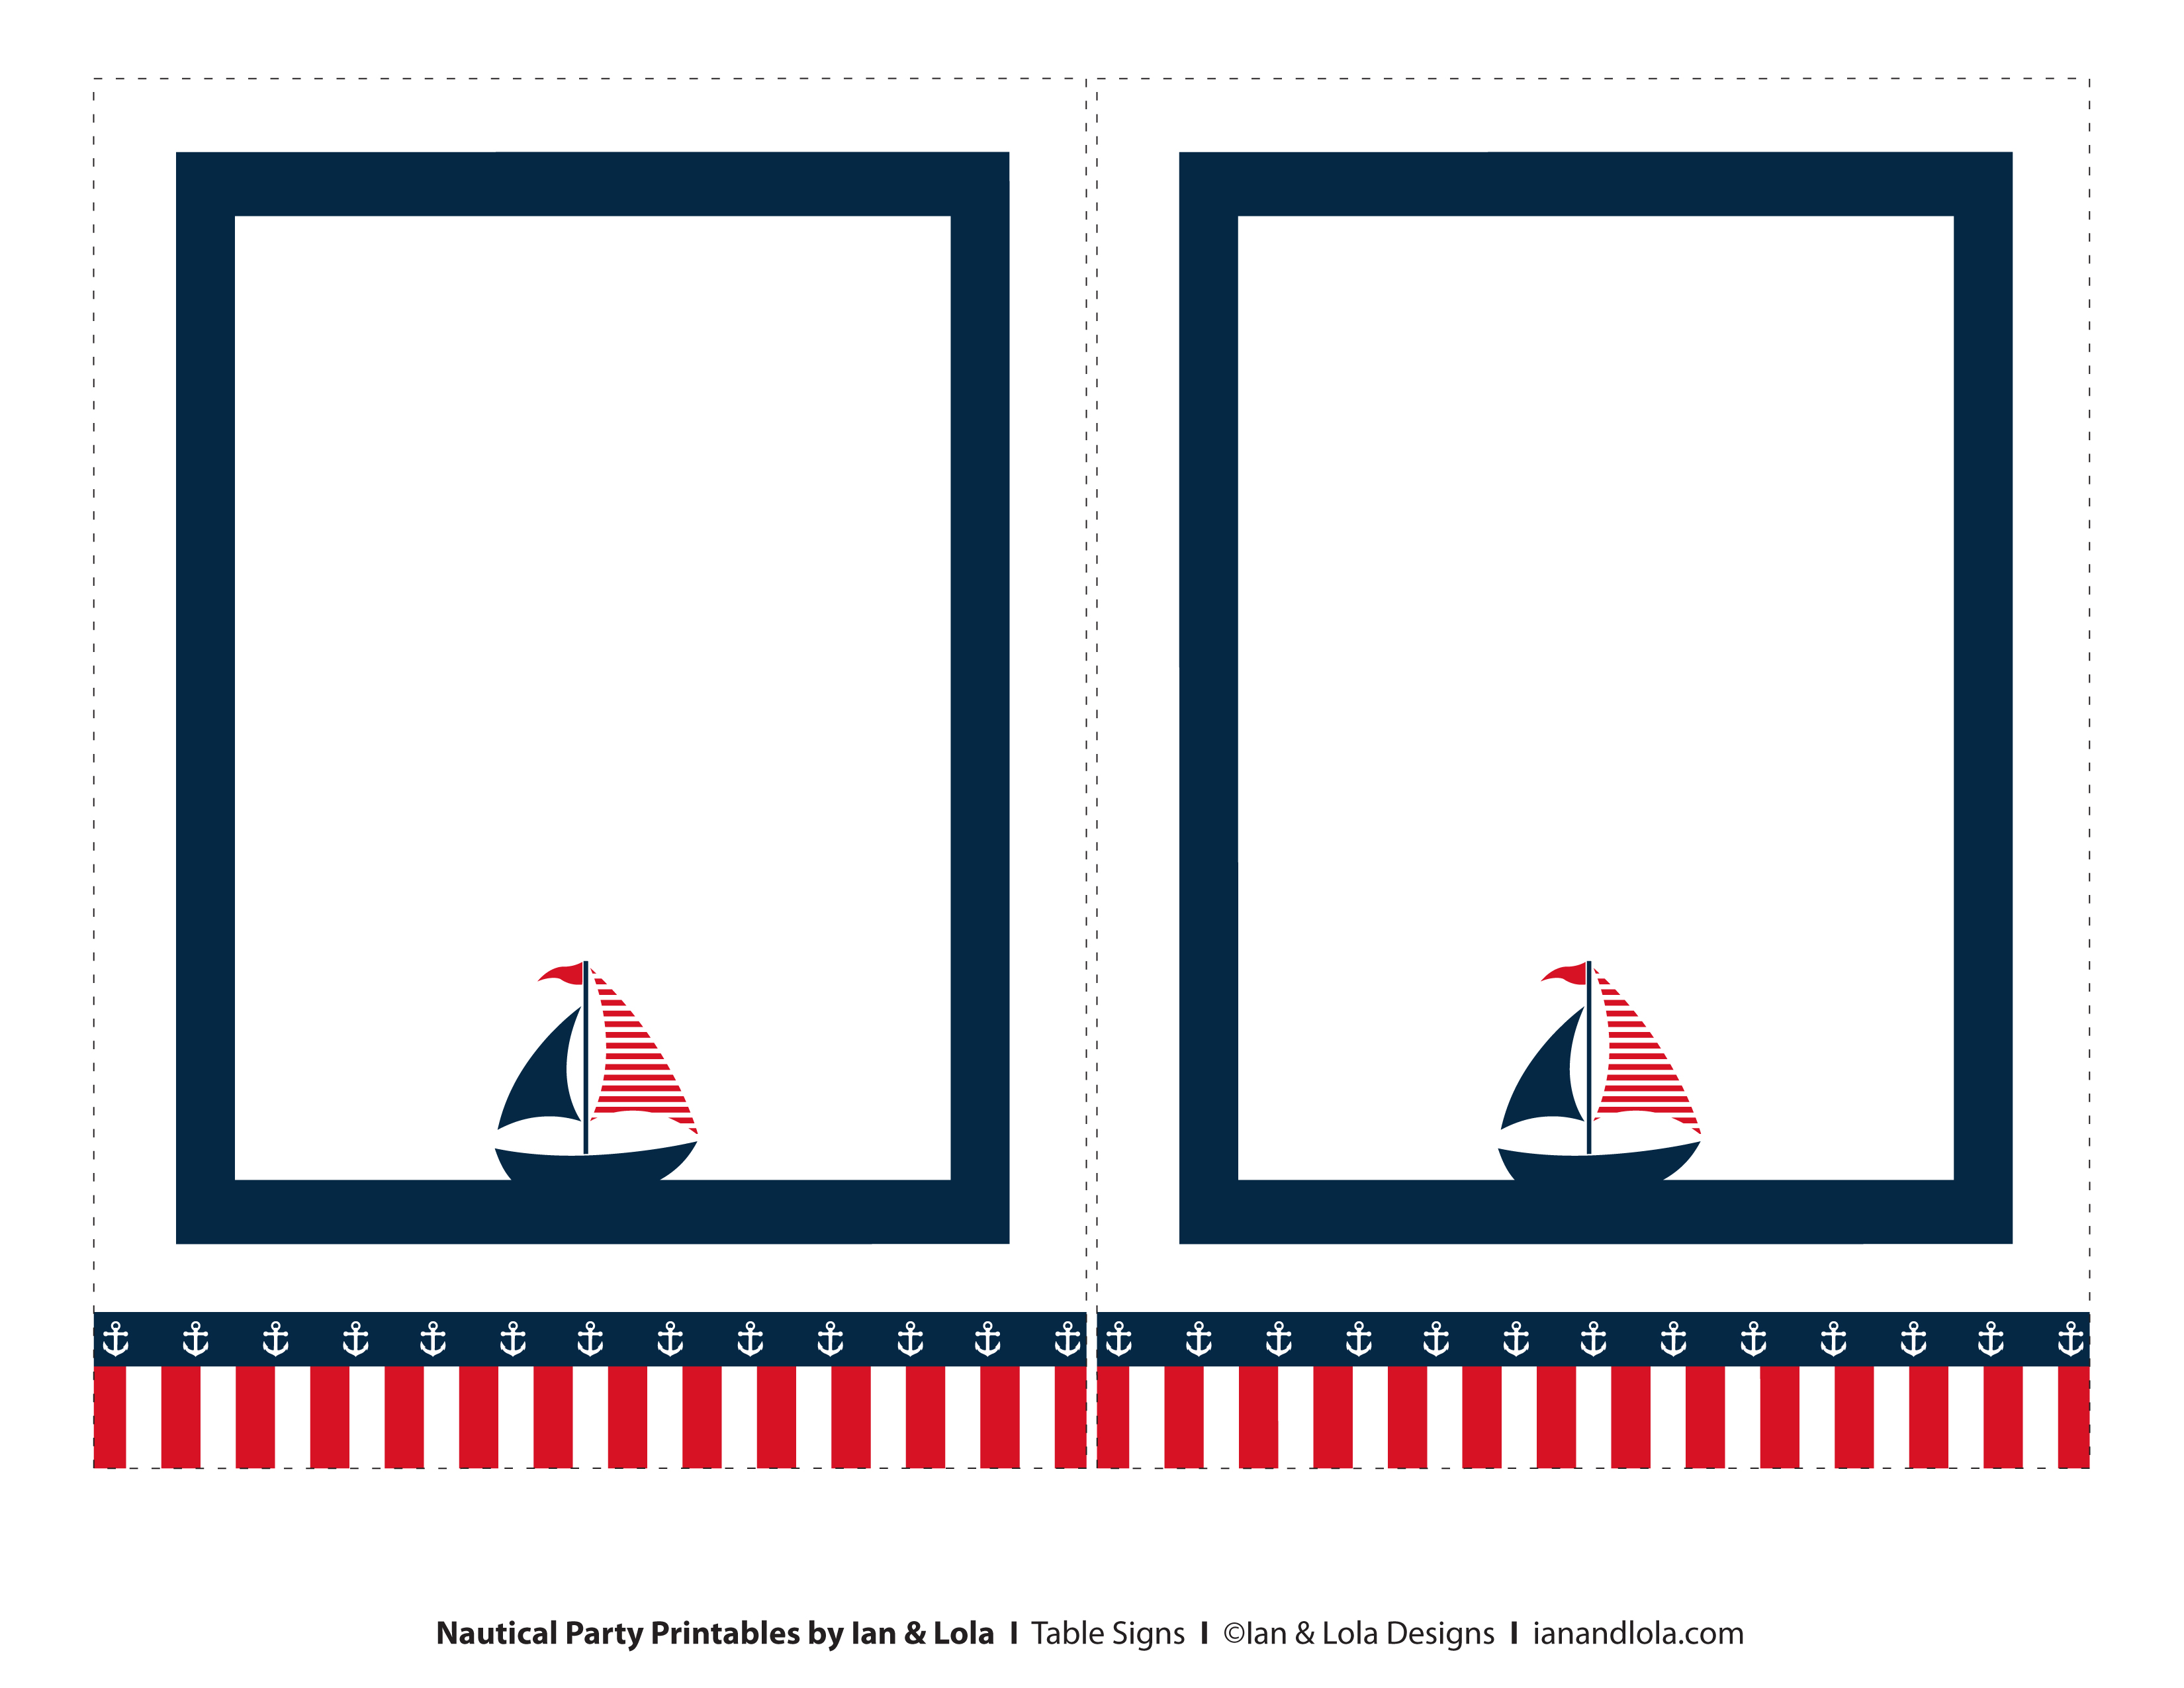 Free Nautical Party Printables from Ian & Lola Designs Catch My Party